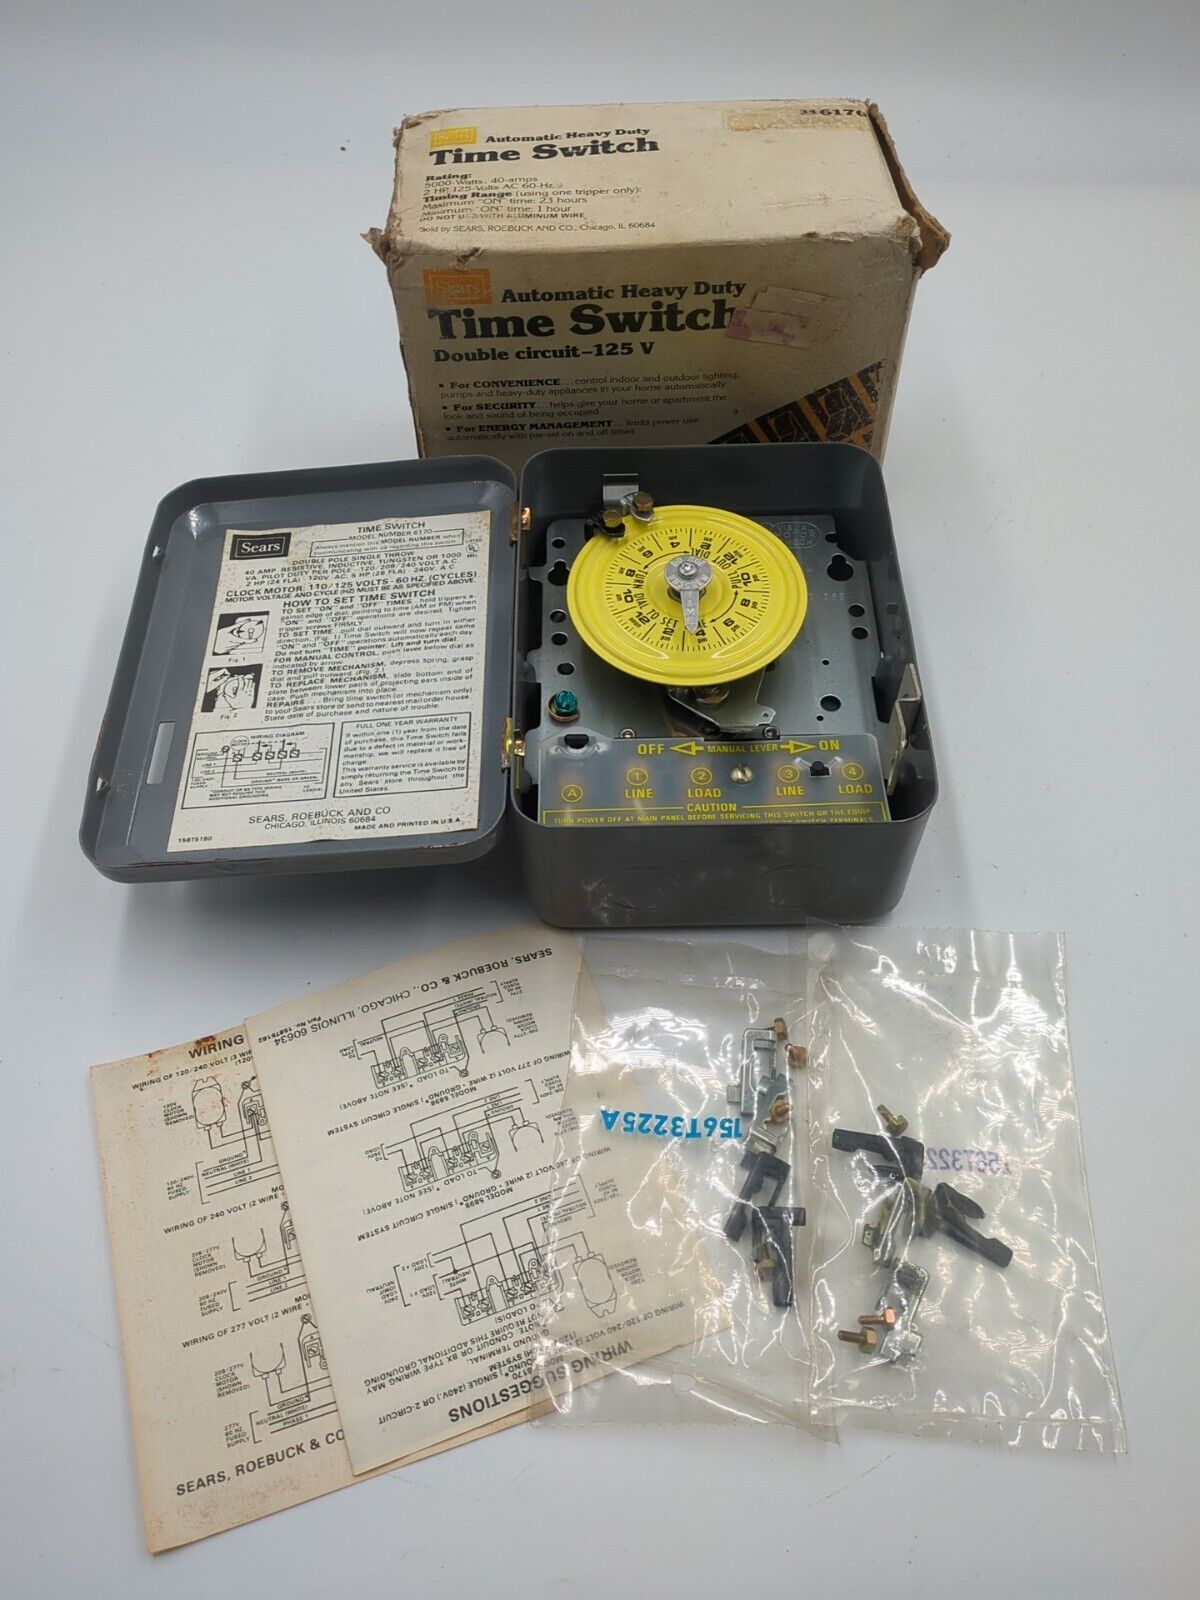 Sears Vintage All Purpose Time Switch 6170 in Original Box with Owner\'s Manual